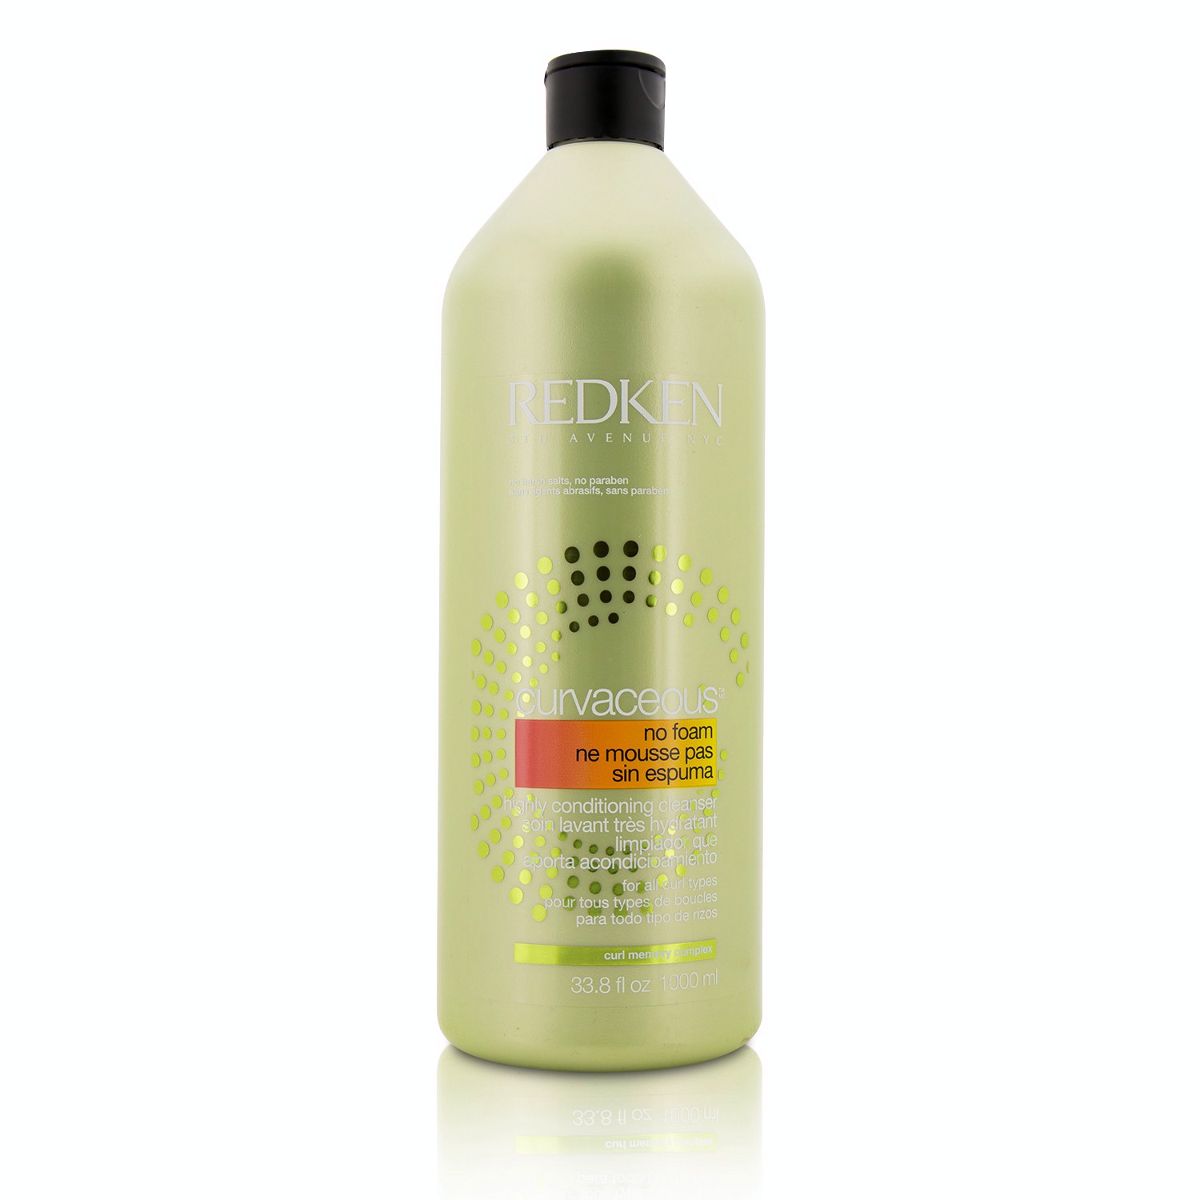 Curvaceous No Foam Highly Conditioning Cleanser (For All Curls Types) Redken Image